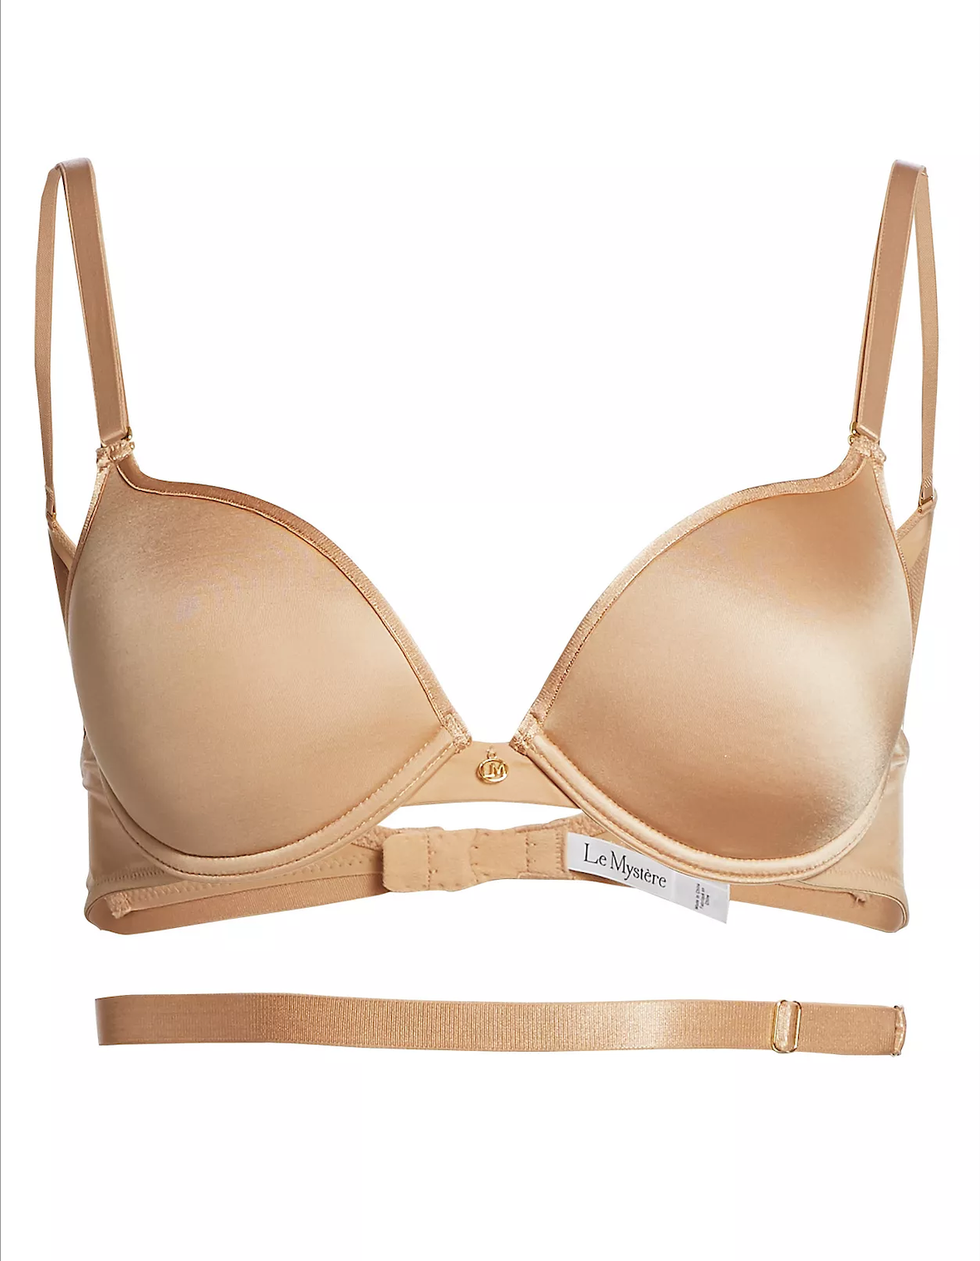 Barely There Women Convertible Full Coverage bras 